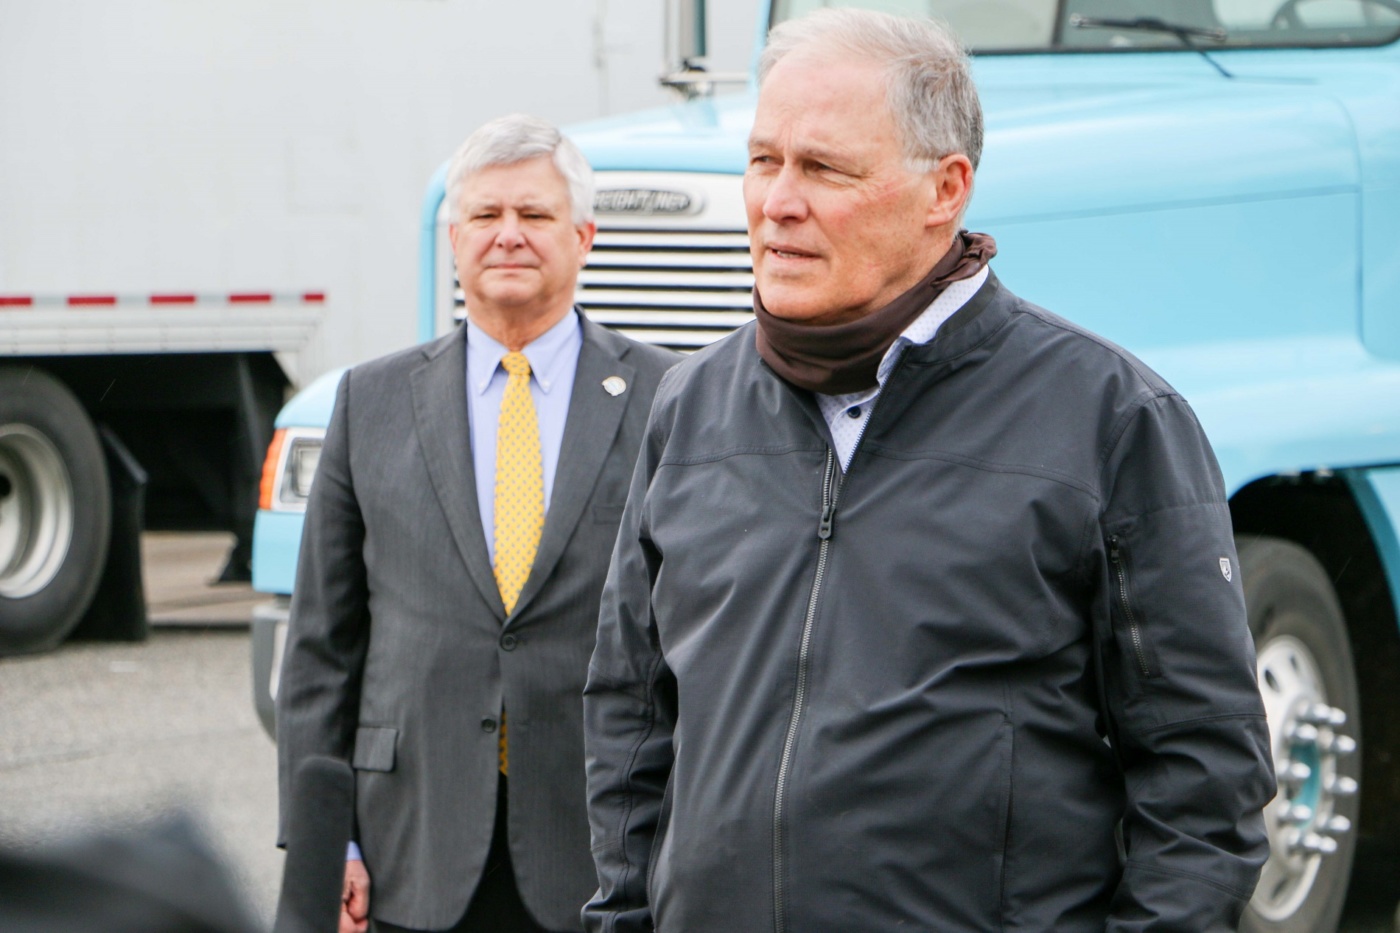 Washington state Governor Jay Inslee addresses the media at Nourish Pierce County, a food distribution center for food banks located in Lakewood, Wa. Lakewood Mayor Don Anderson looks on in the background.